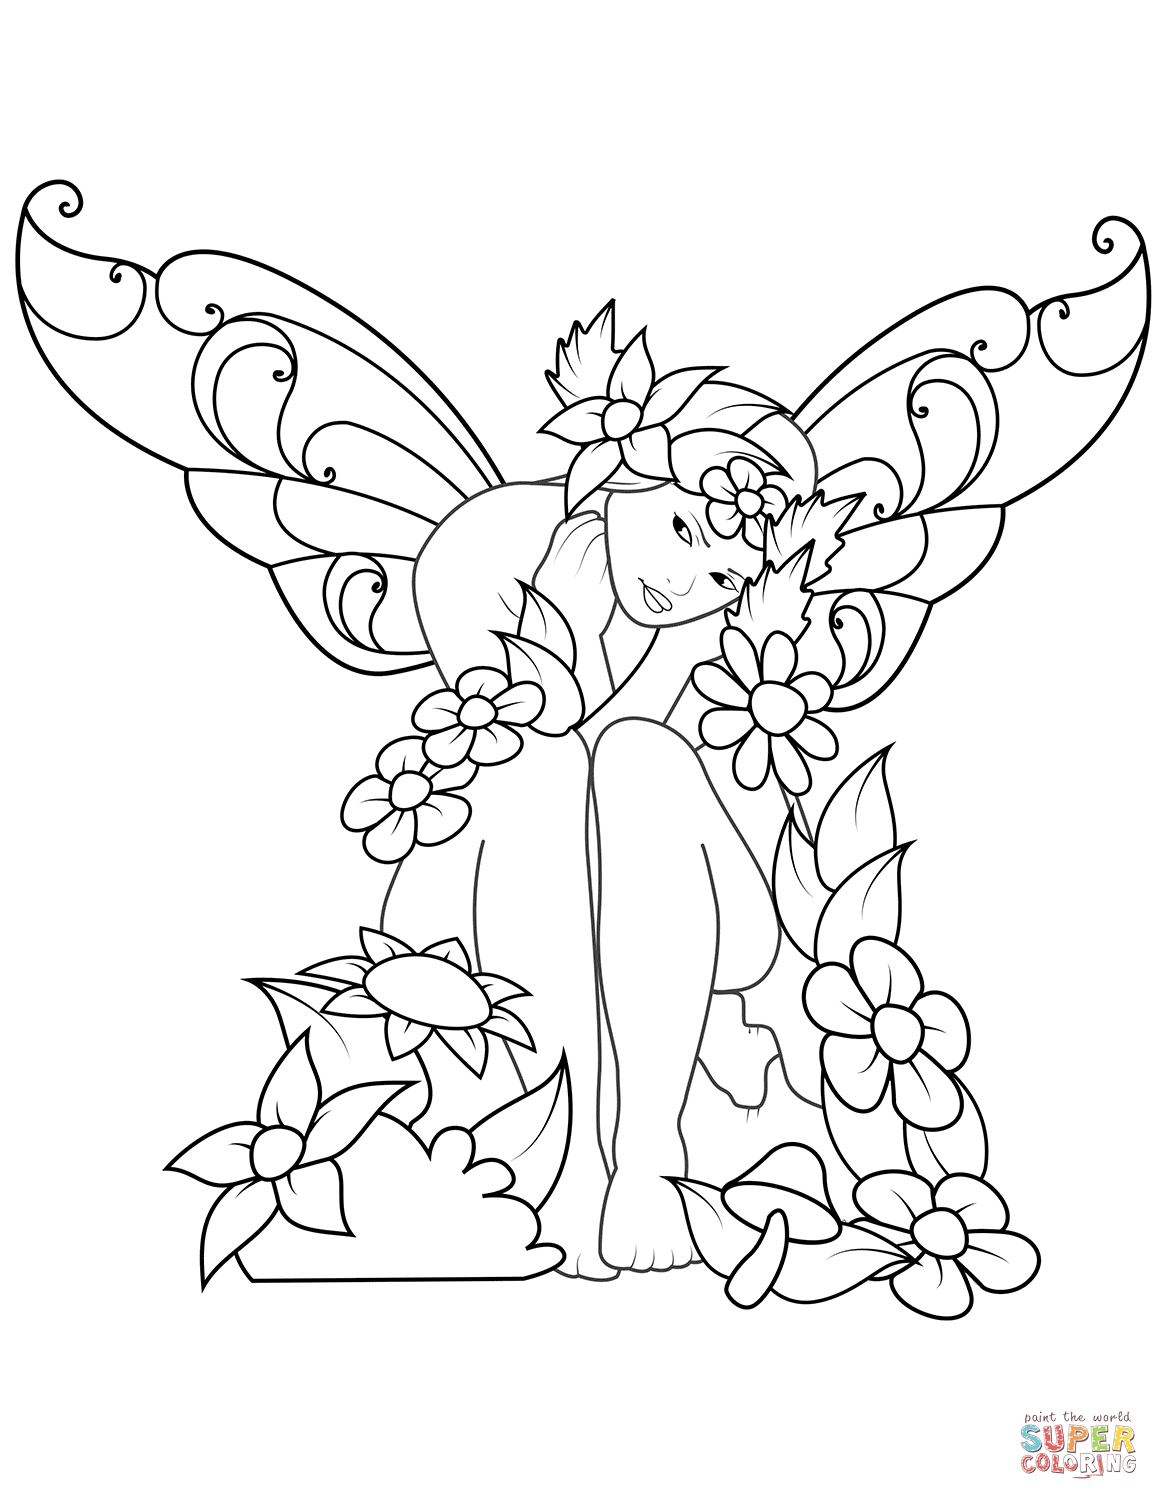 Free Coloring Pages Of Fairies Fairy Coloring Pages Free Coloring Pages